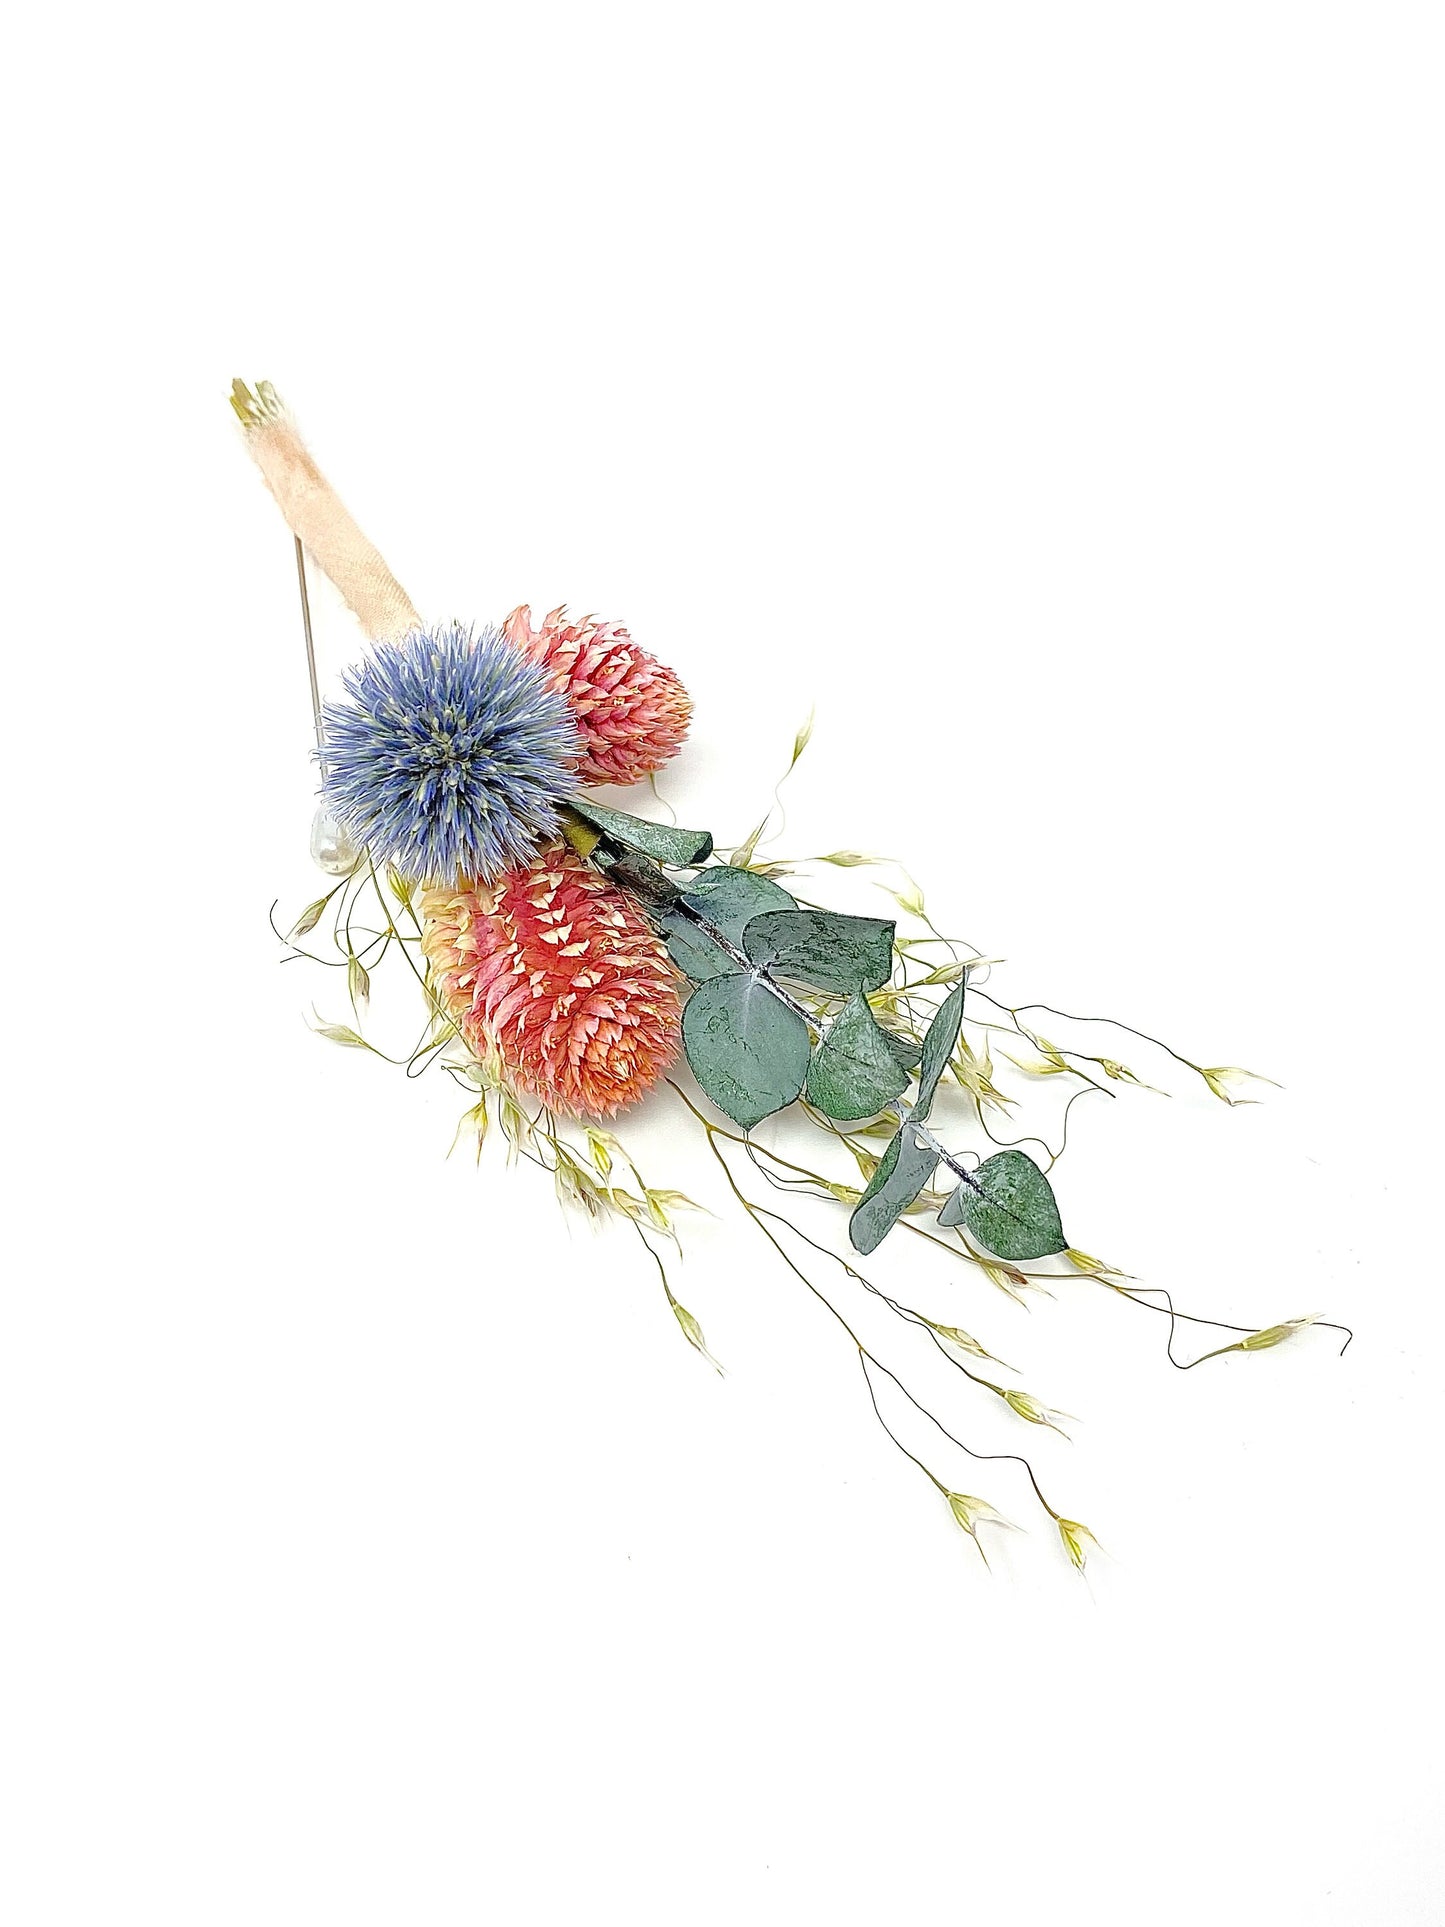 Wedding Boutonniere, Preserved Floral, Dried Flowers, Bridal Accessories, Winter, Decor, Blue and Pink, Eucalyptus, Globe Thistle